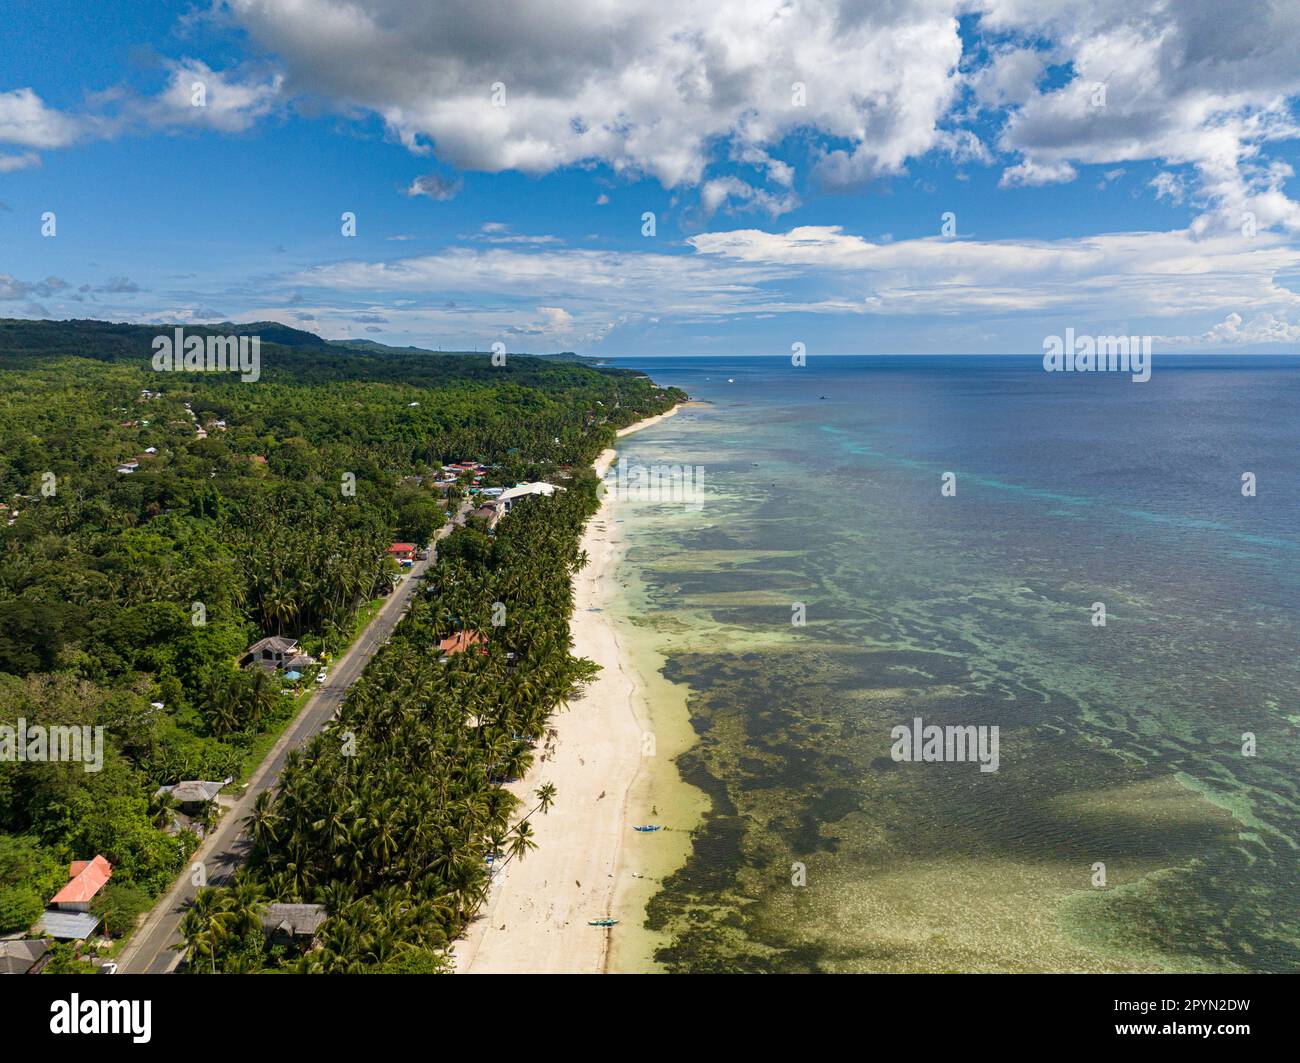 White shiny seashore with turquoise lagoon of coral reefs along with the healthy coconut trees. Siquijor, Philippines. Stock Photo